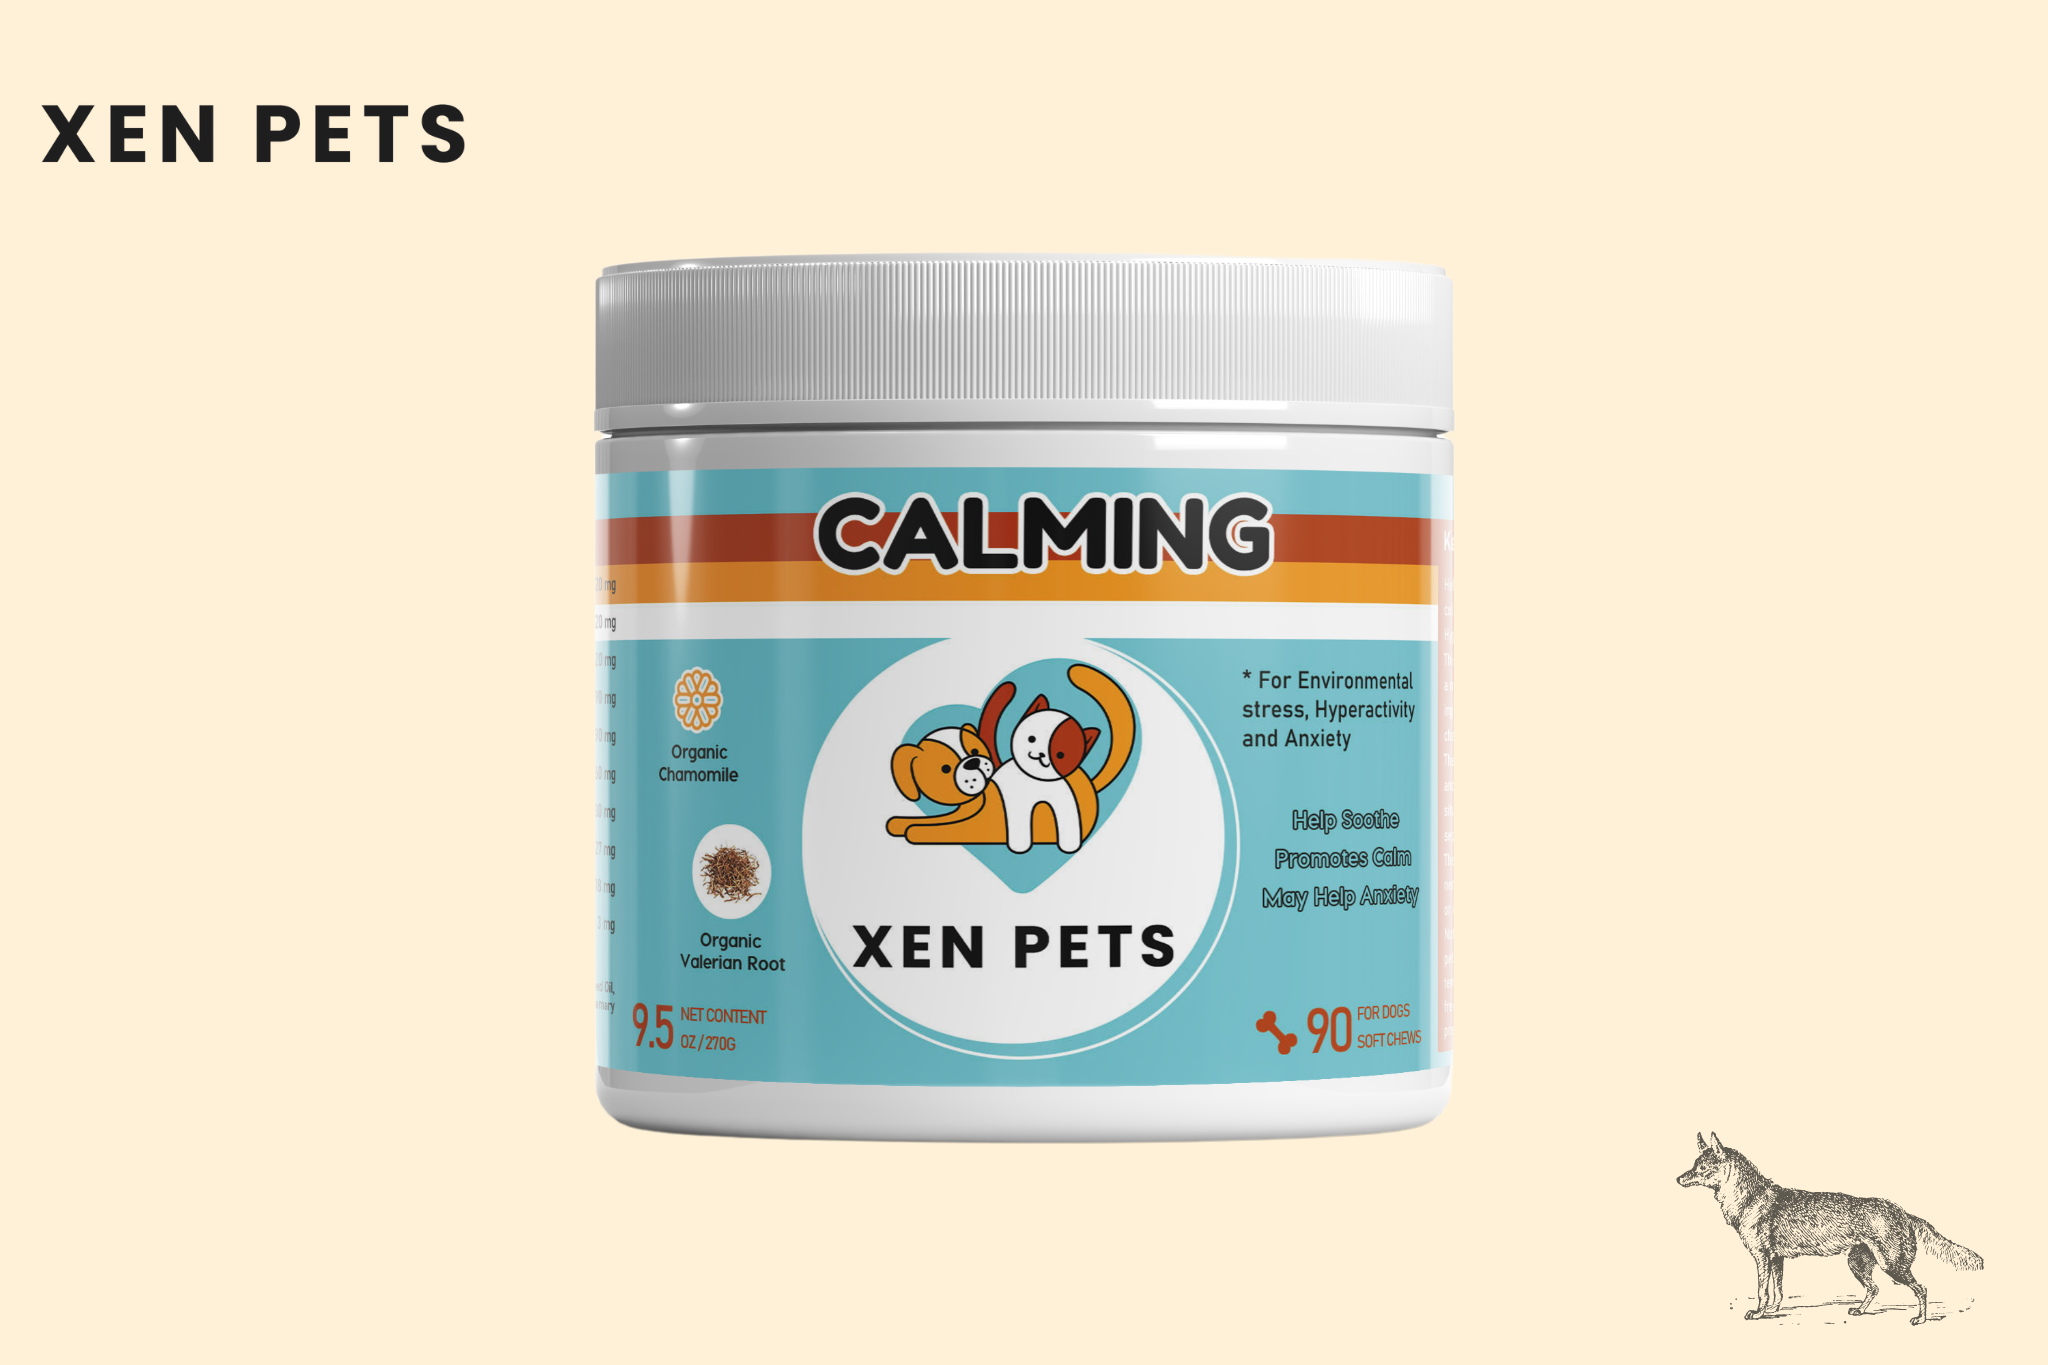 Xen Pets calming chews for dogs